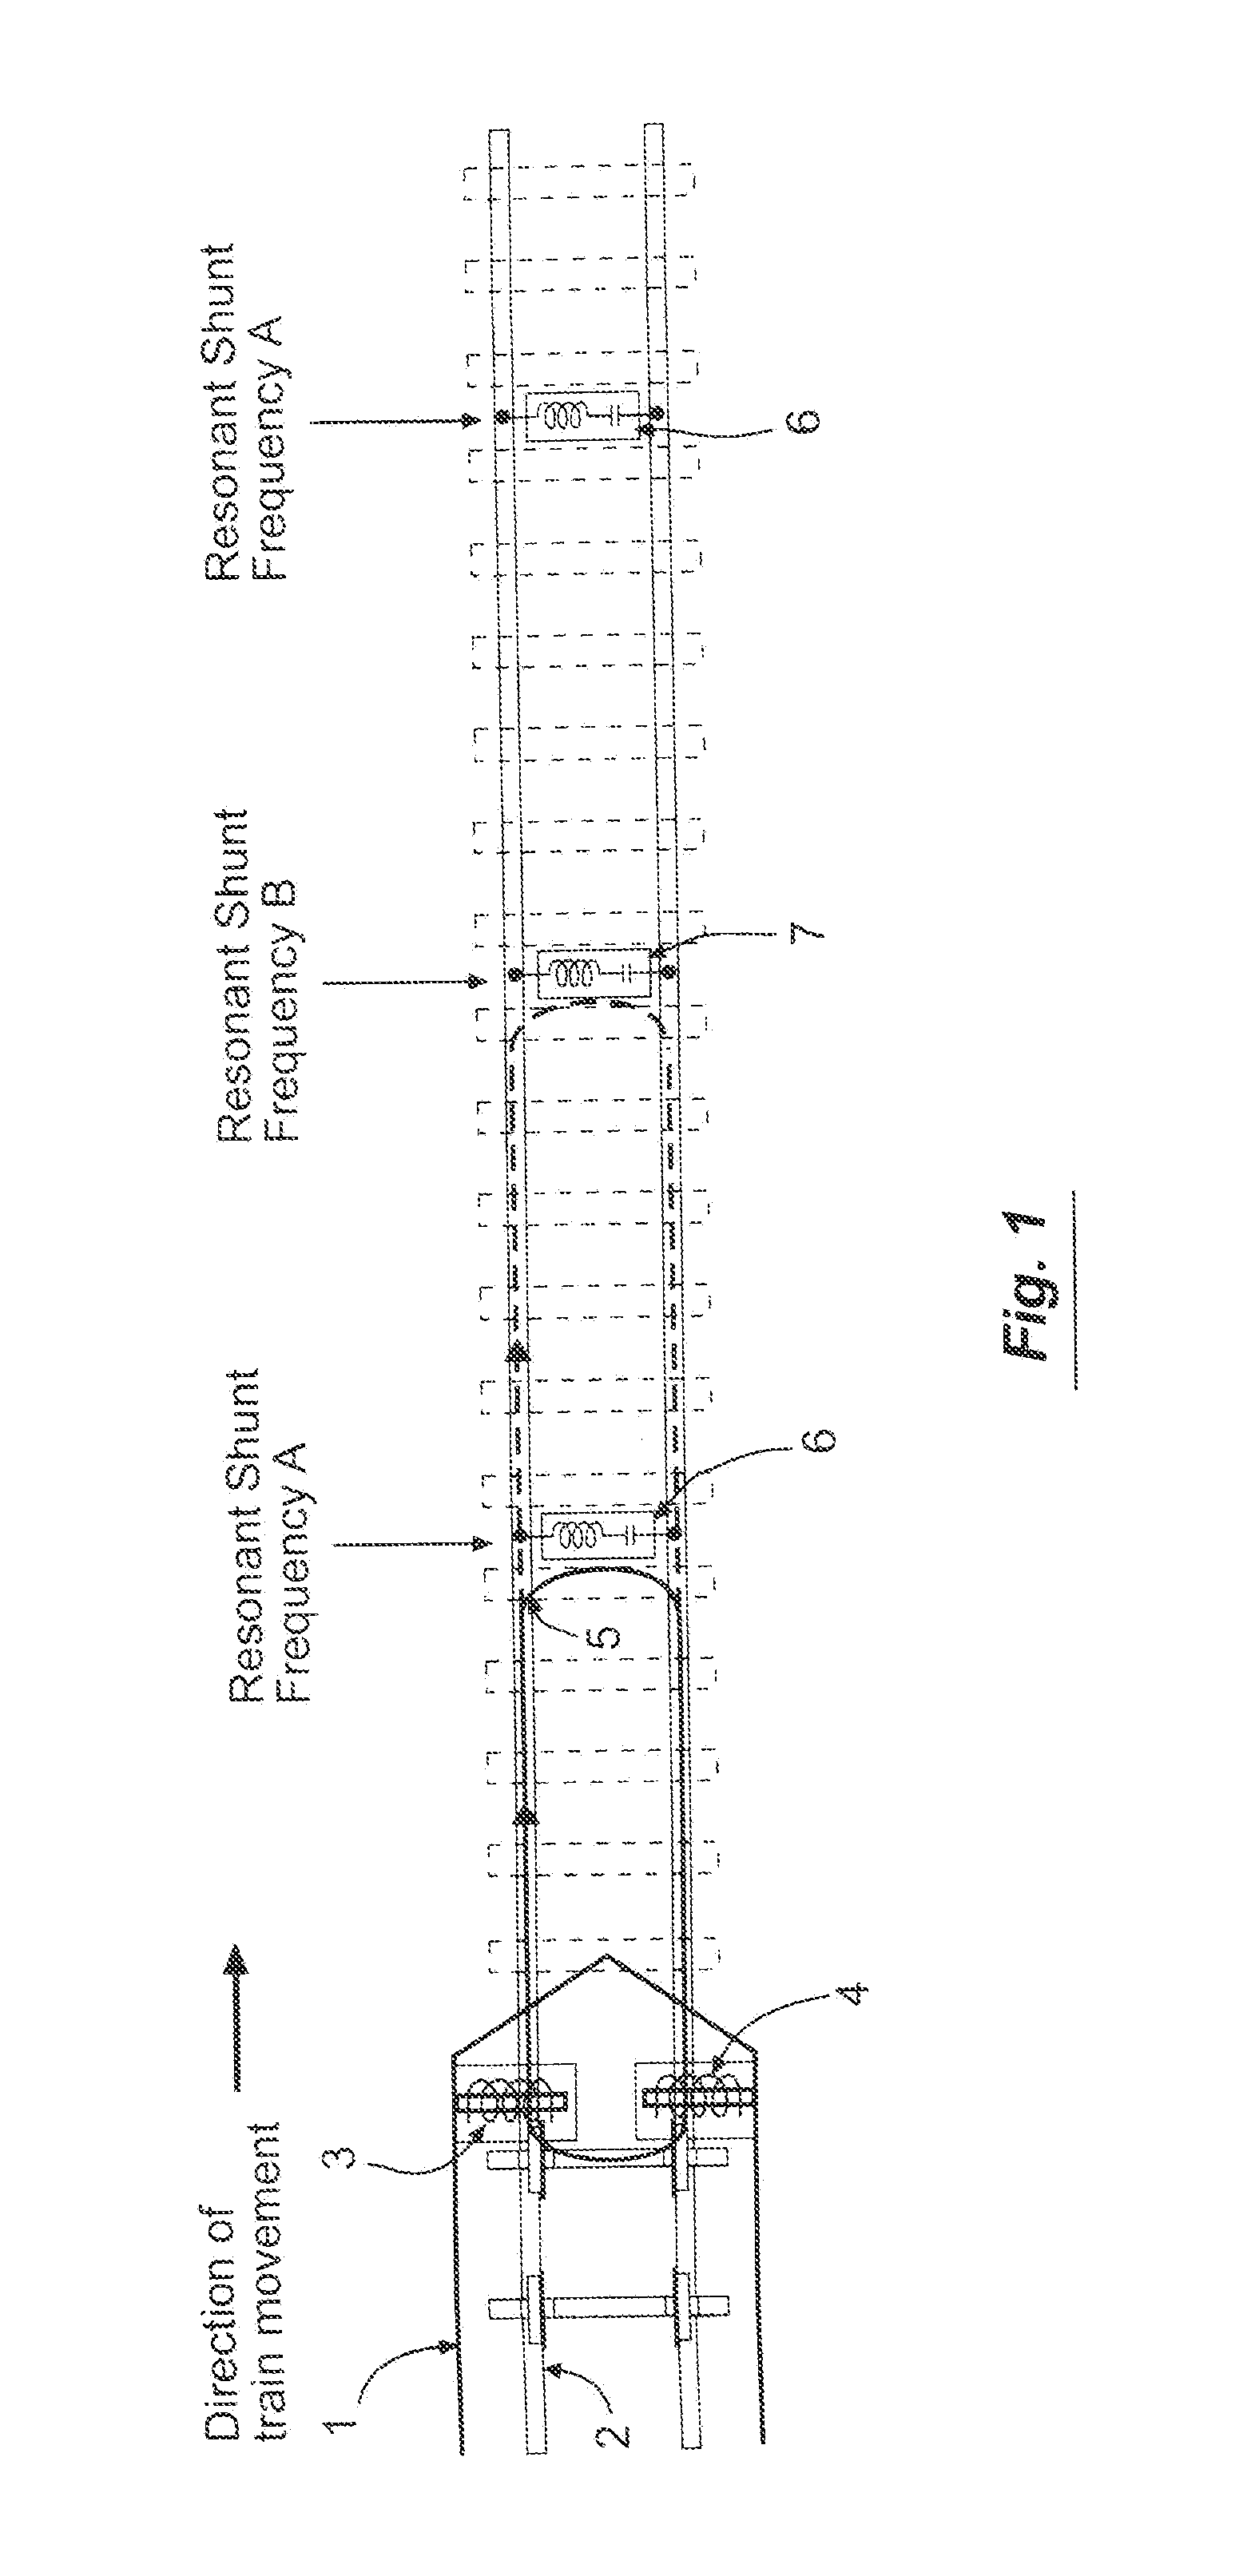 System and method for detecting broken rail and occupied track from a railway vehicle